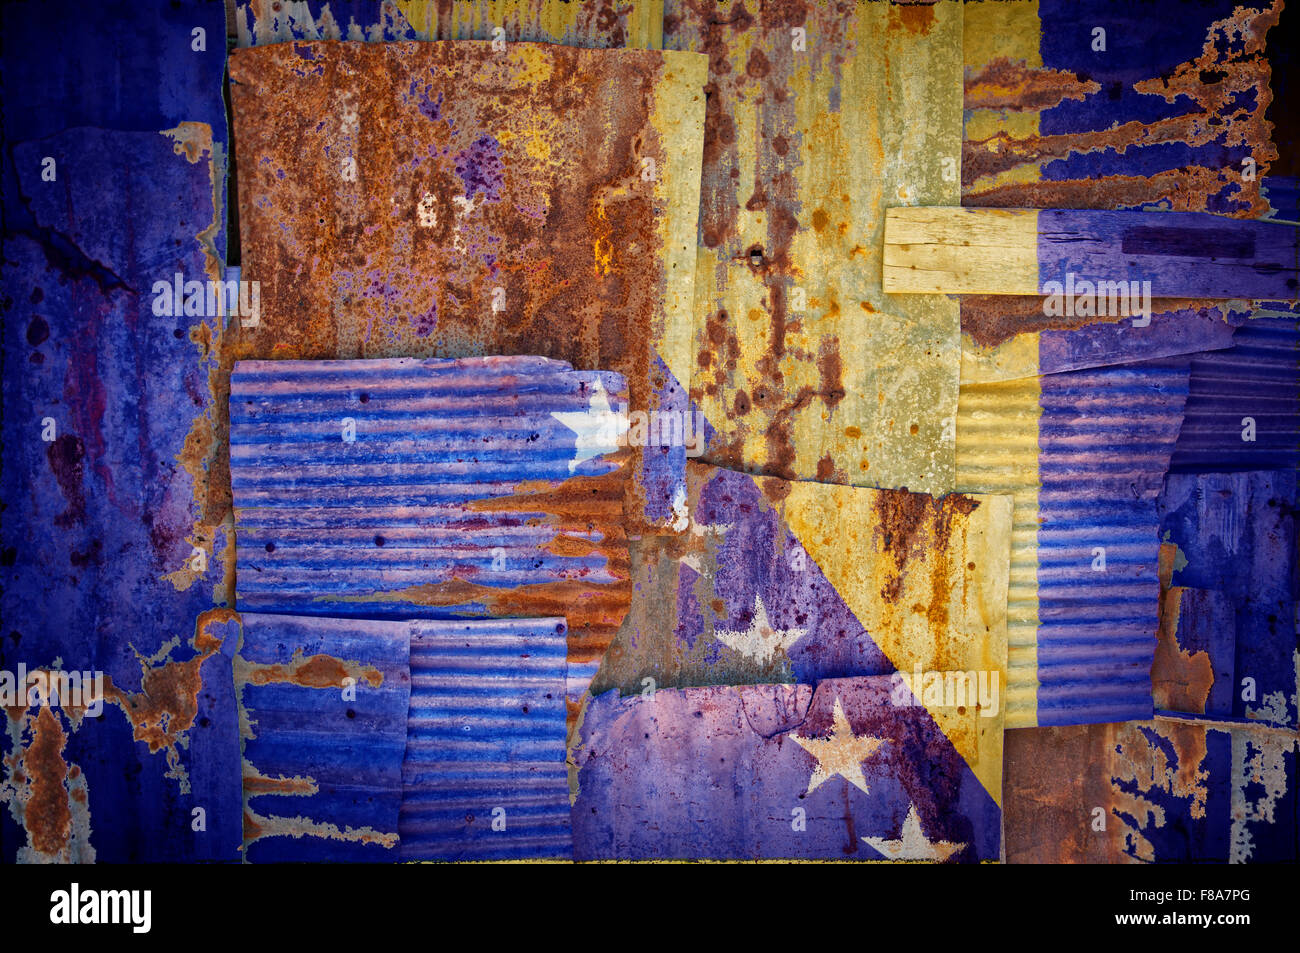 An abstract background image of the flag of Bosnia and Herzegovina painted on to rusty corrugated iron sheets Stock Photo